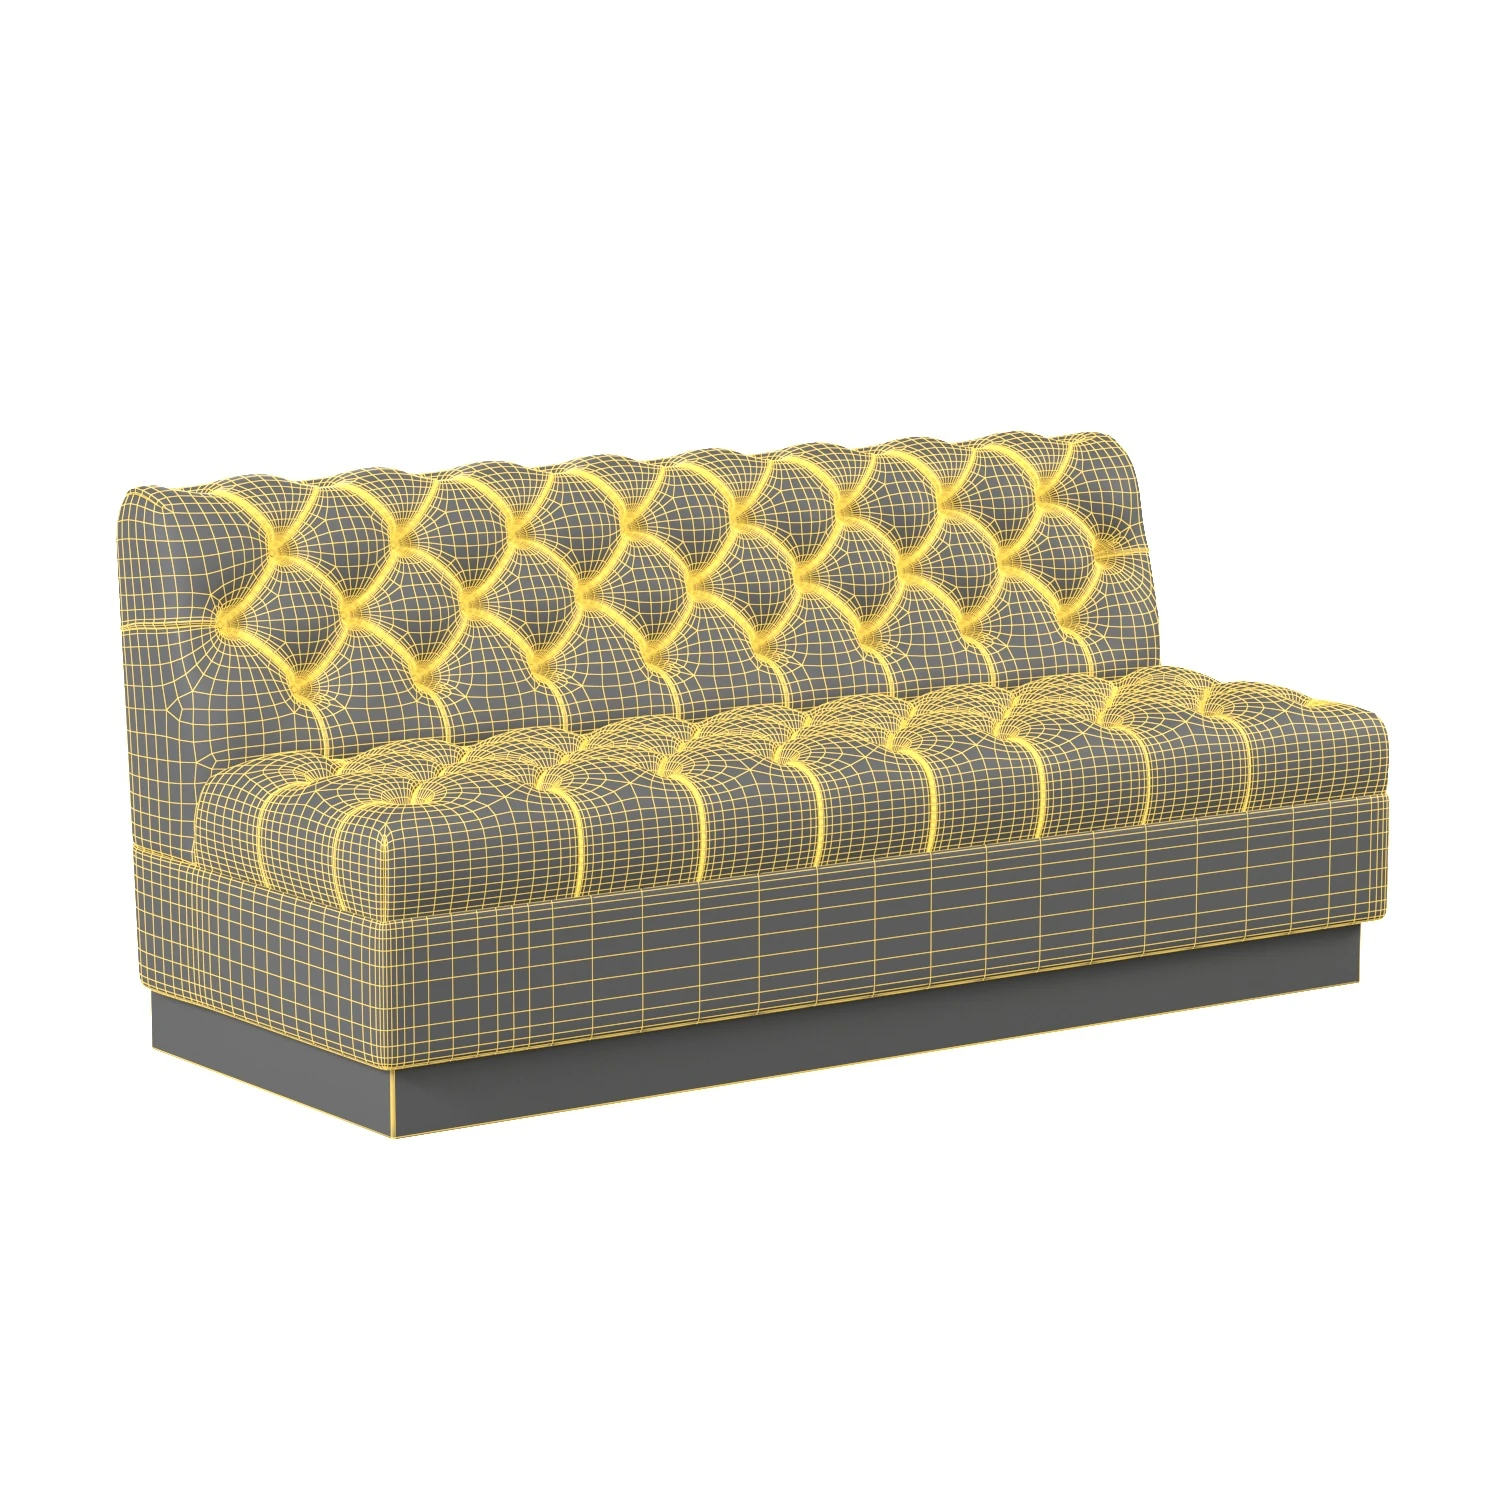 Silicon Valley Banquette PBR 3D Model_07